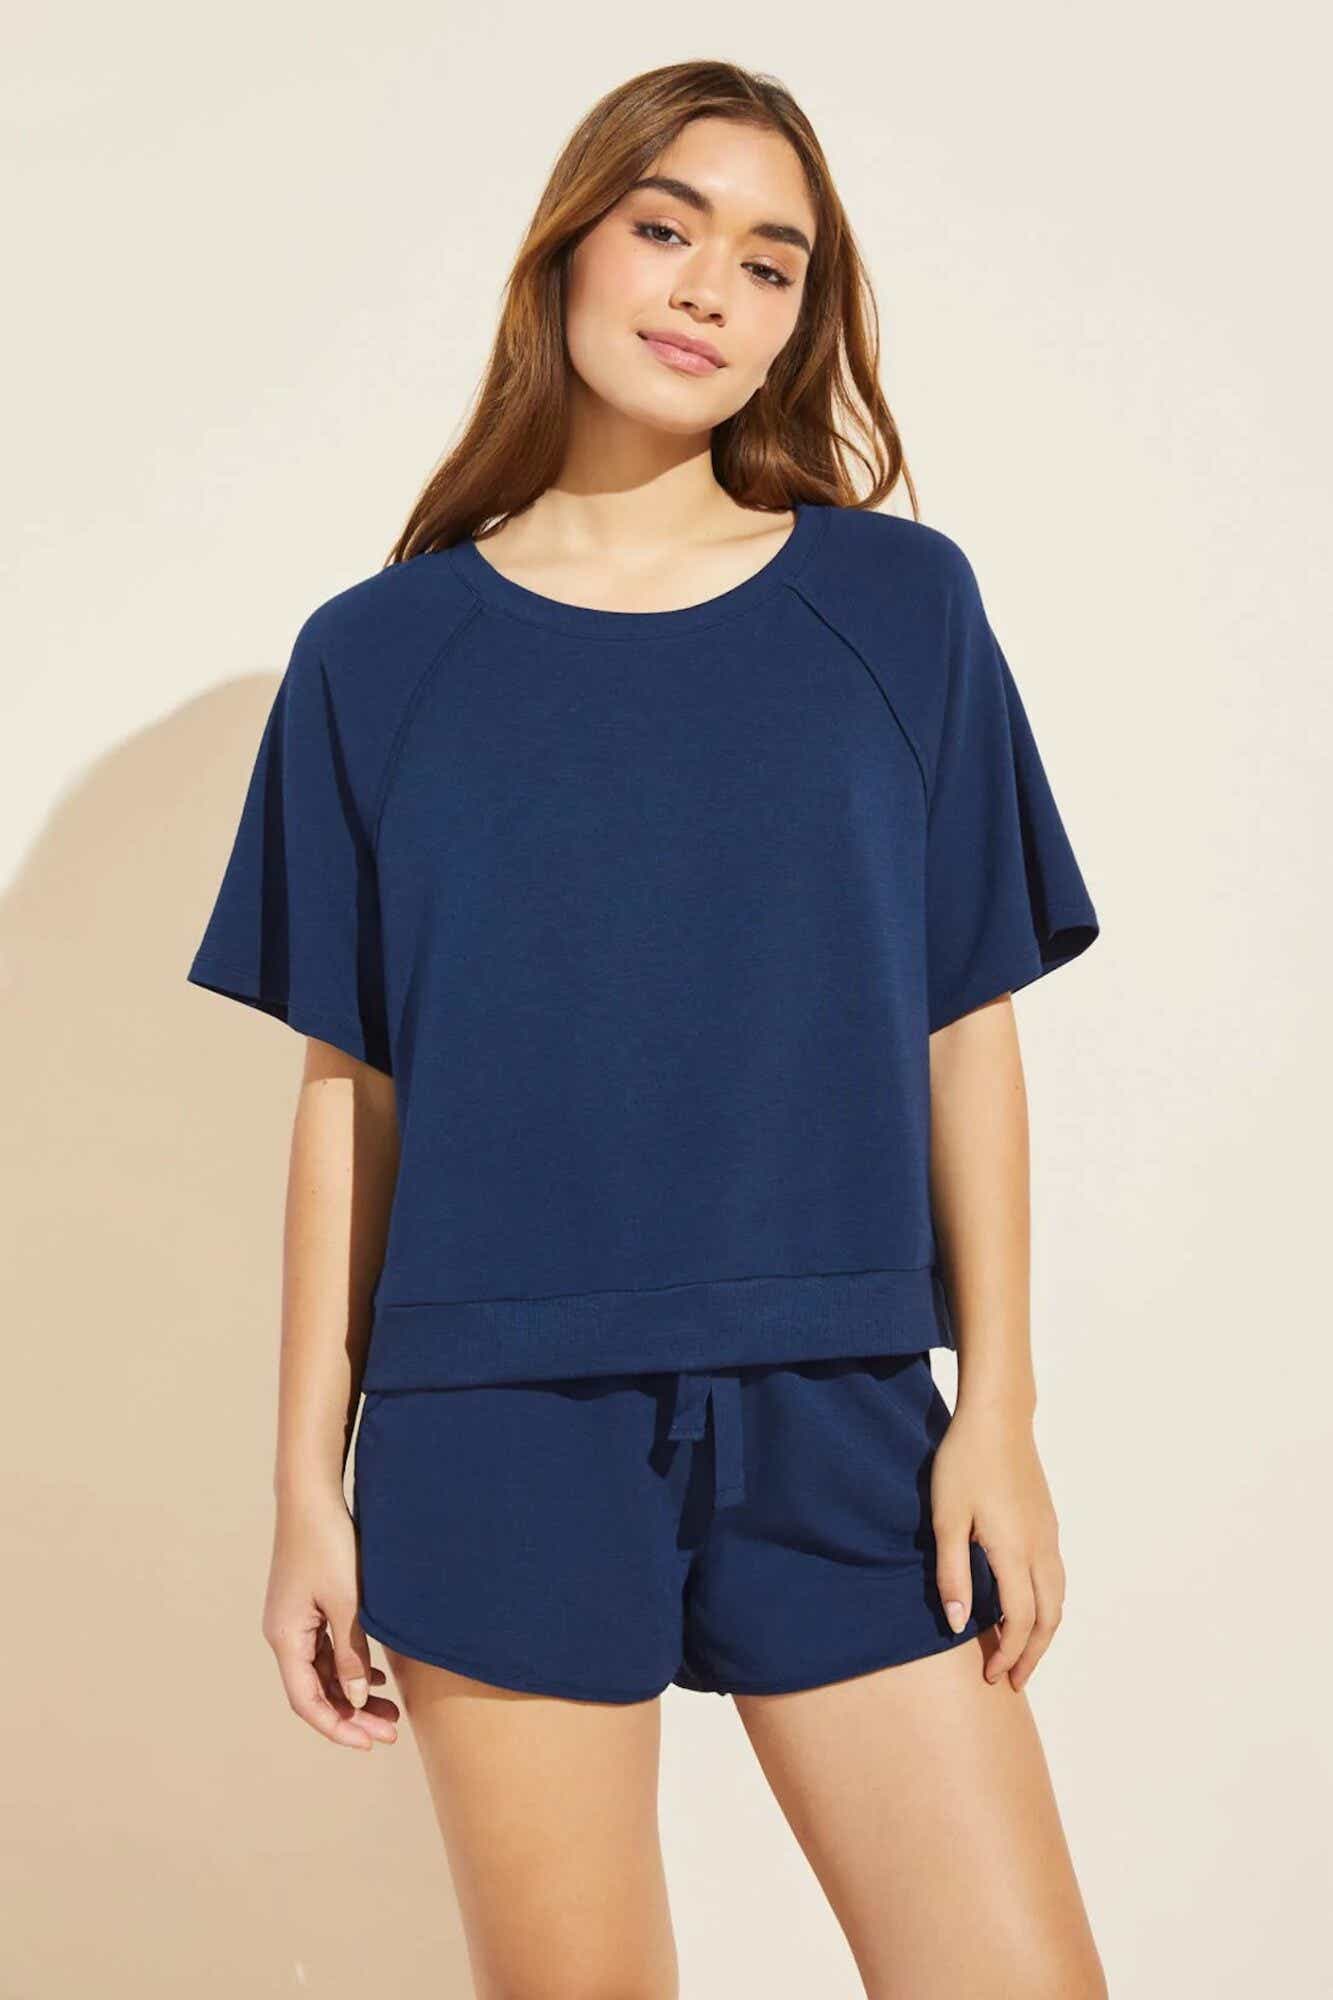 A smiling woman wears a loose fitting, short-sleeved soft knit top paired with matching dark blue soft shorts.